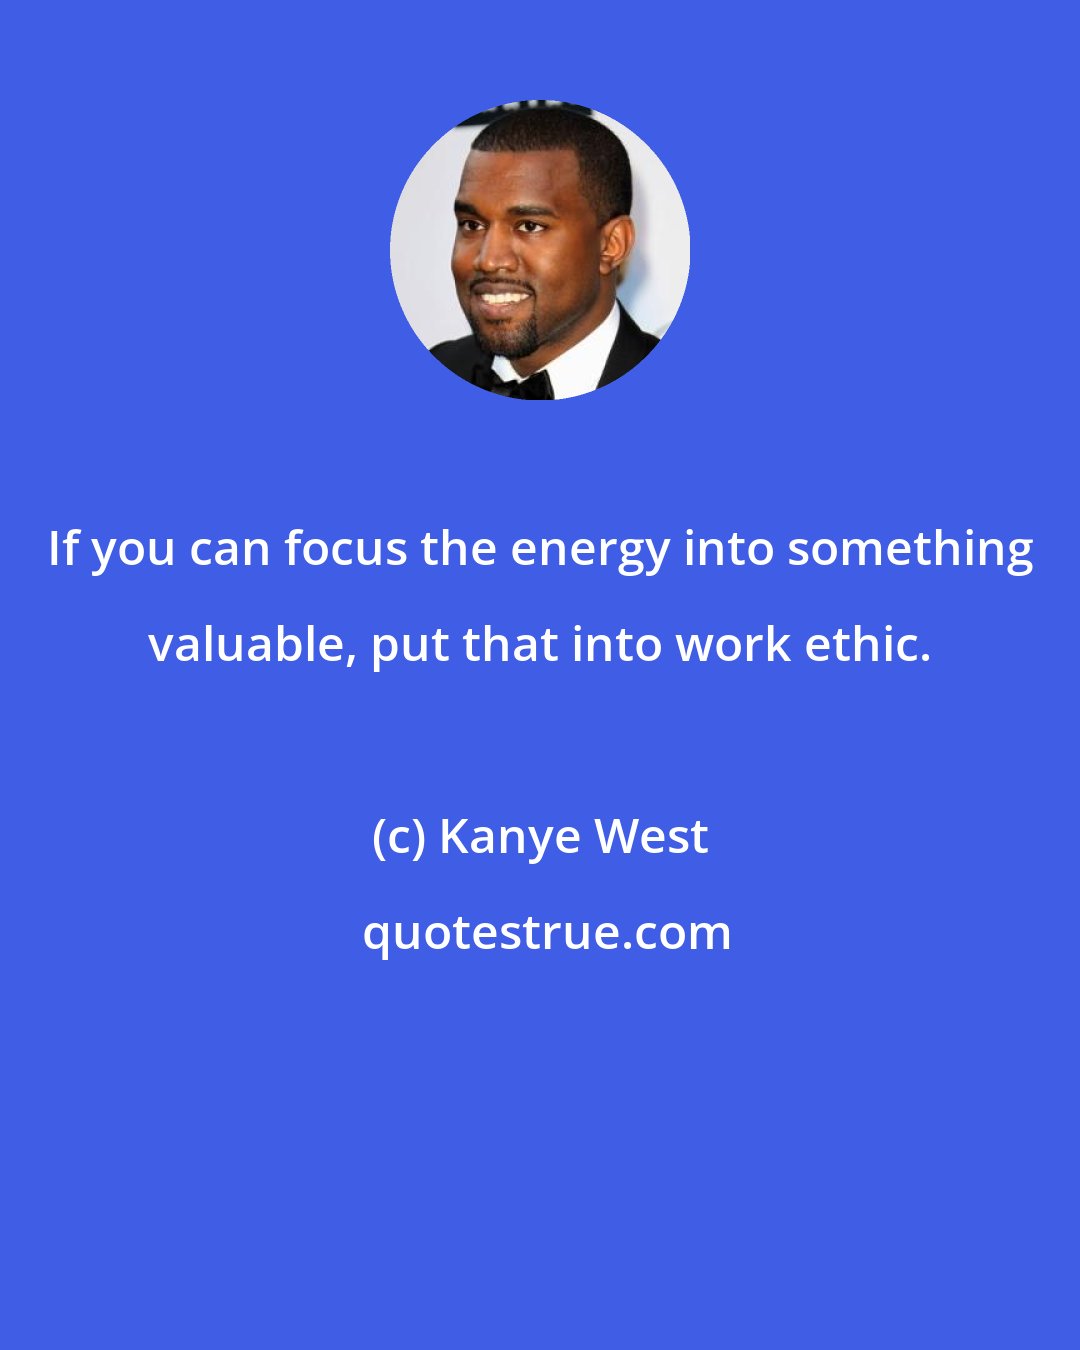 Kanye West: If you can focus the energy into something valuable, put that into work ethic.